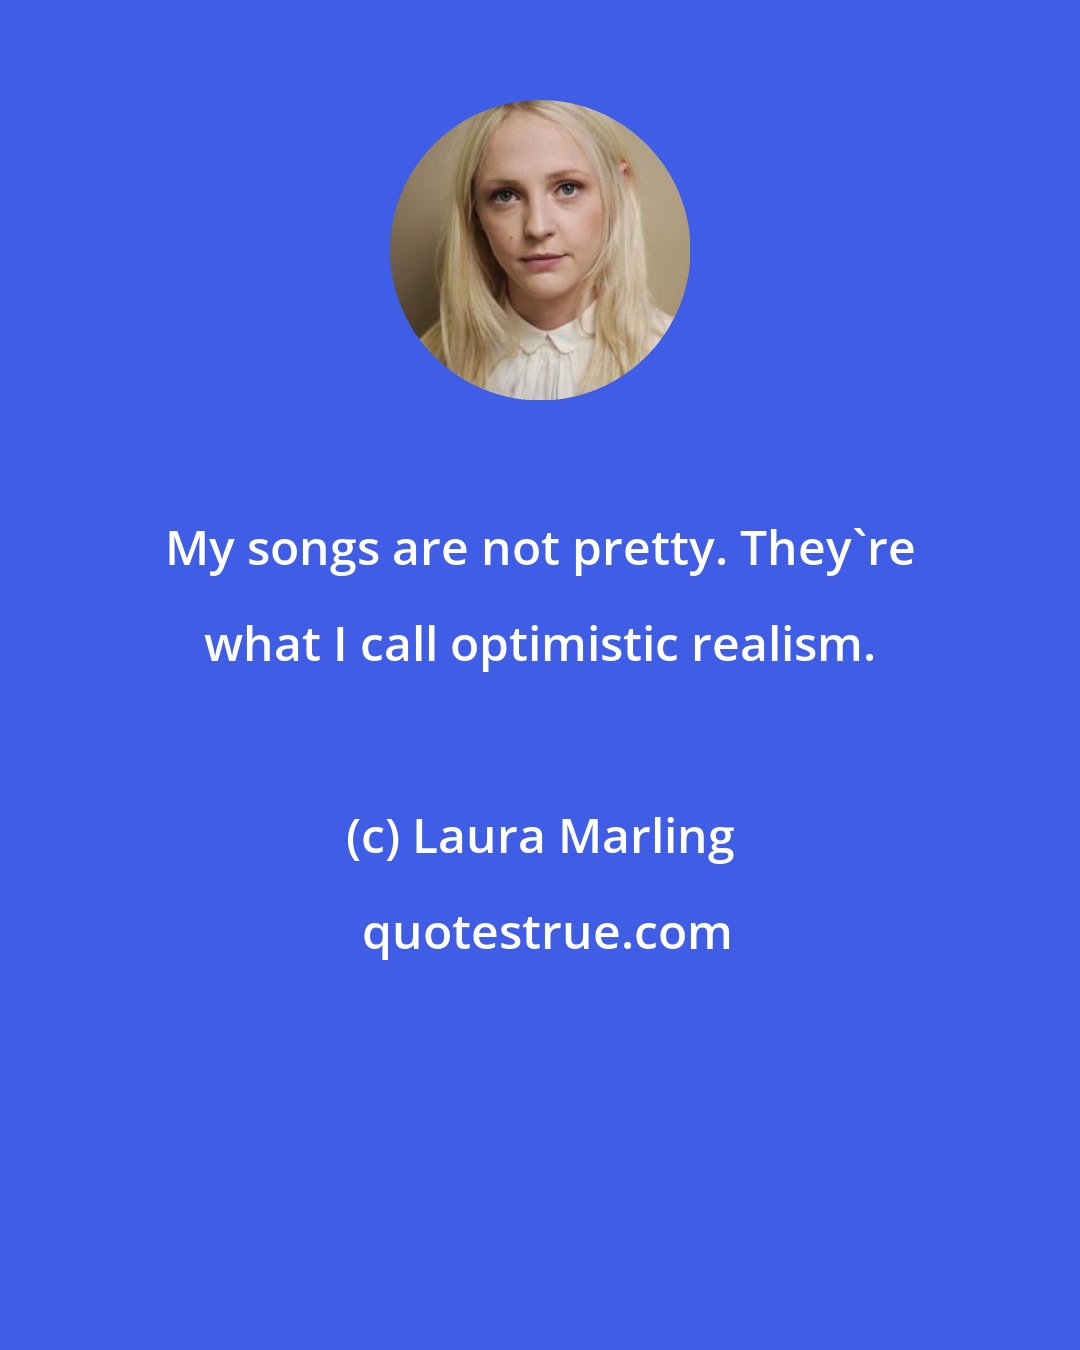 Laura Marling: My songs are not pretty. They're what I call optimistic realism.